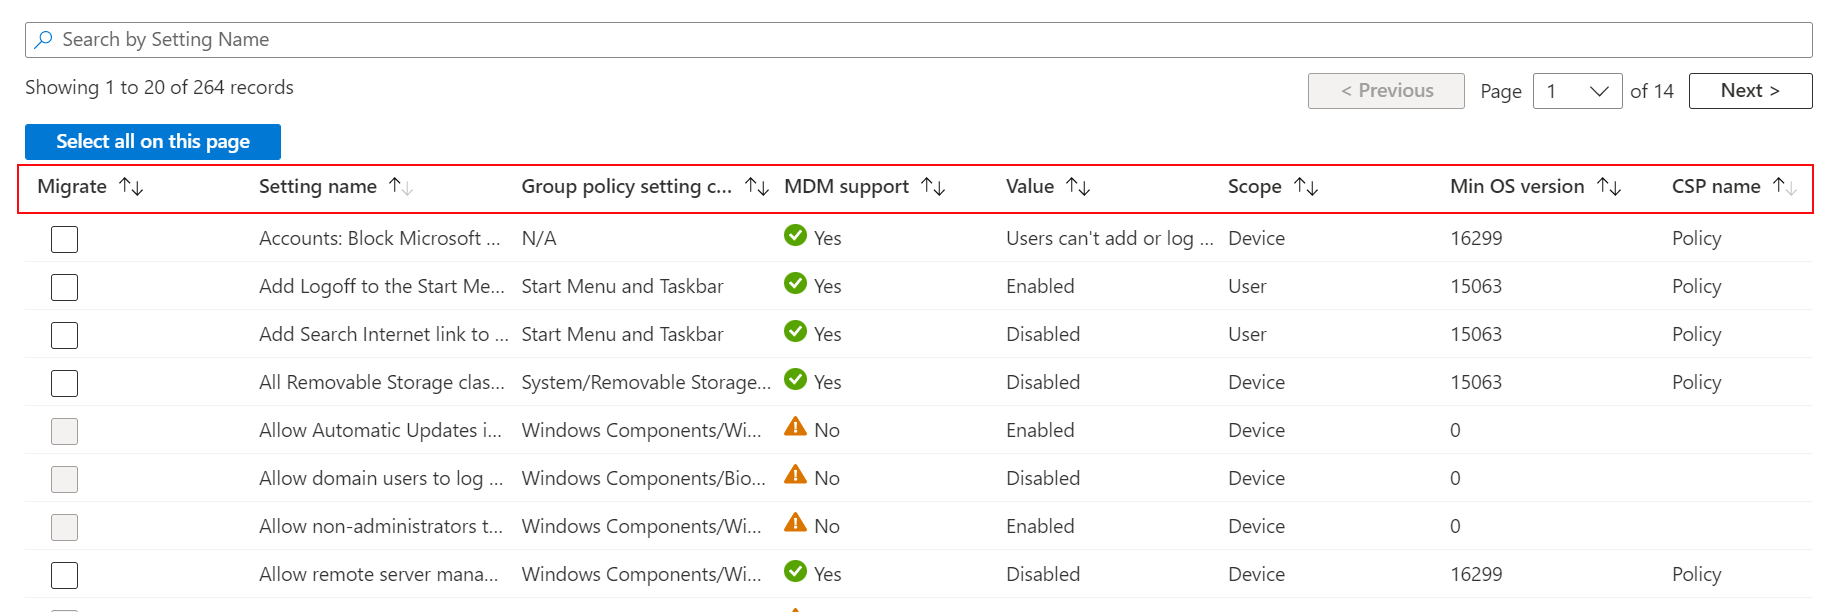 Screenshot that shows how to sort the settings using the Migrate, Setting name, Group policy setting category, MDM support, value, scope, min OS version, and CSP name Group Policy Analytics migrate features in Microsoft Intune.